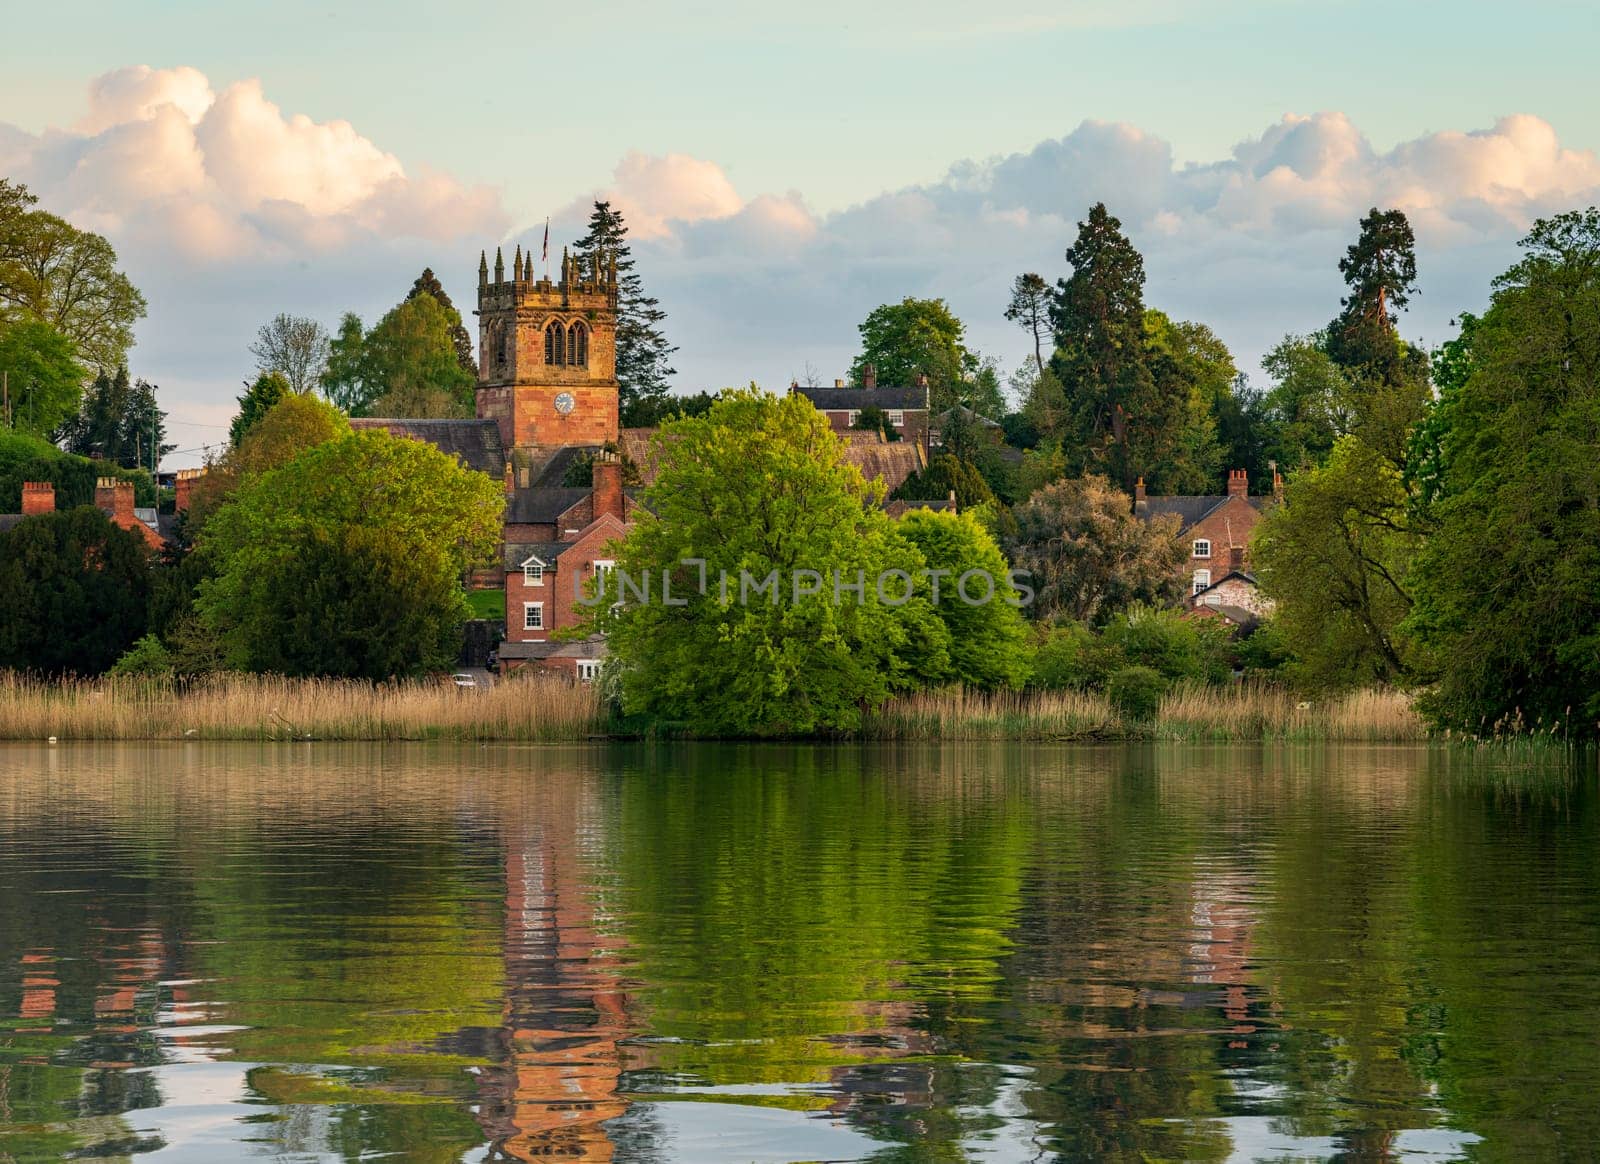 View across the Mere to the town of Ellesmere in Shropshire by steheap